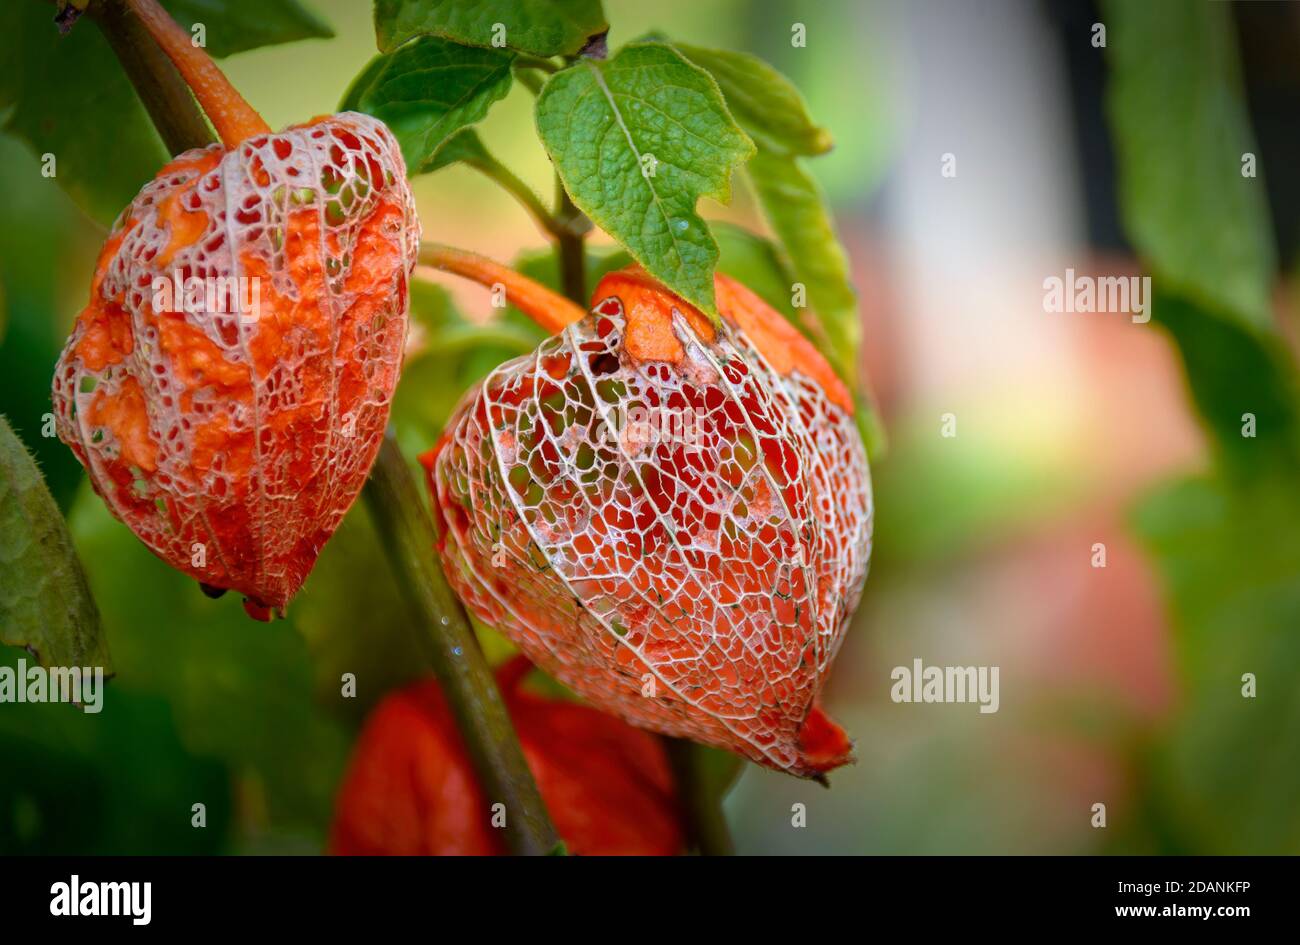 orange coloured husks of a Physalis with mesh of leaf-veins Stock Photo